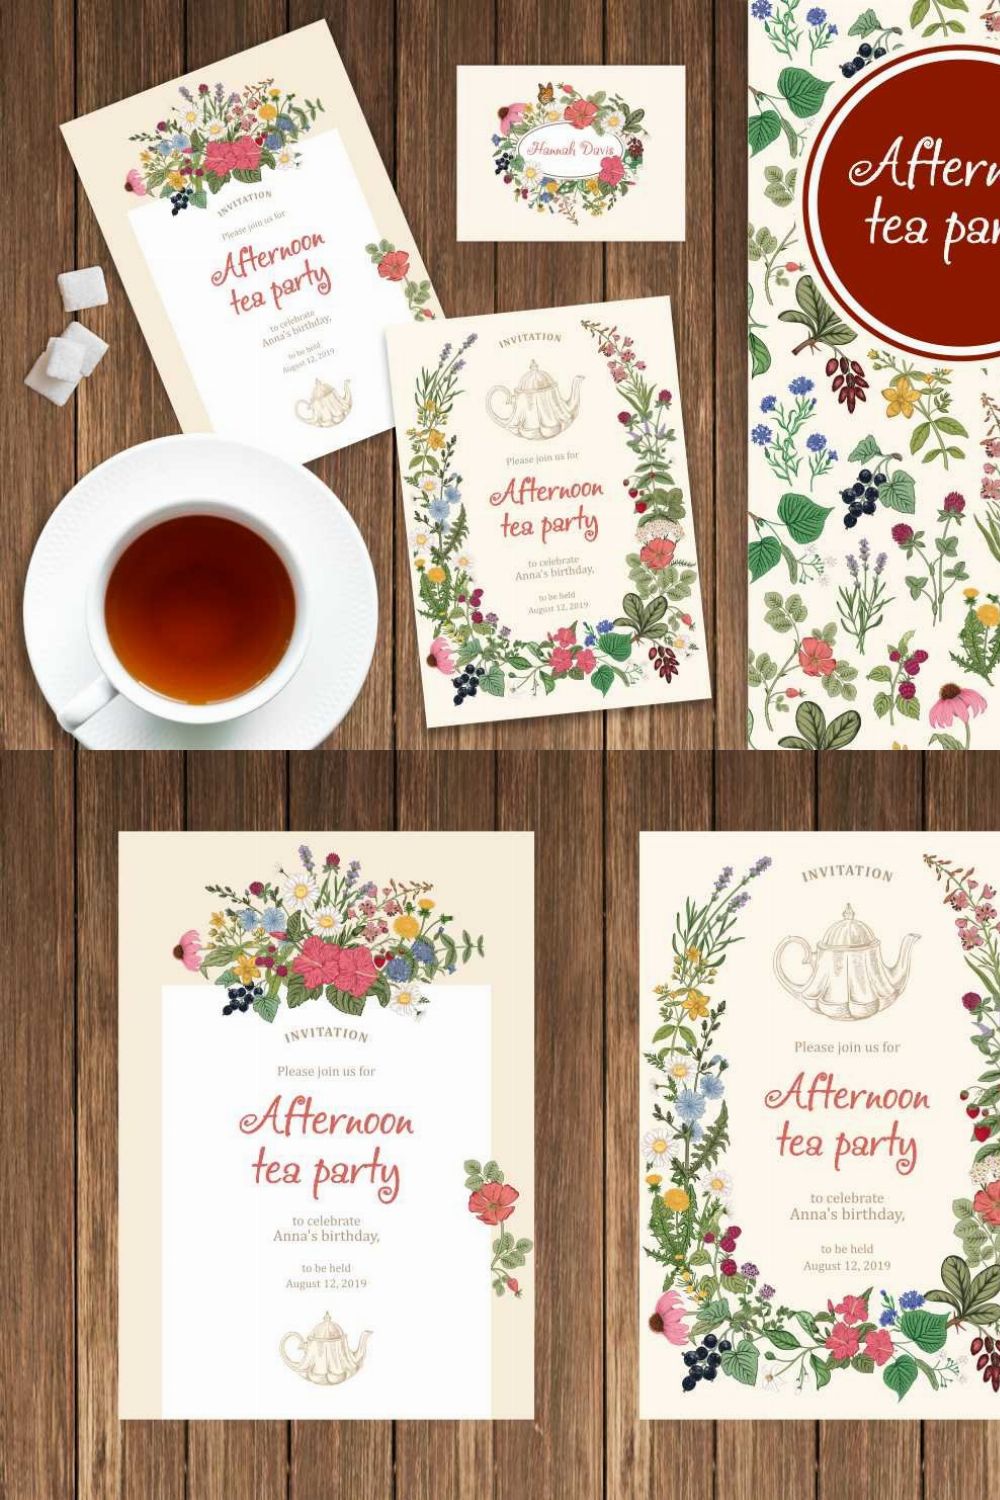 Afternoon tea party pinterest preview image.